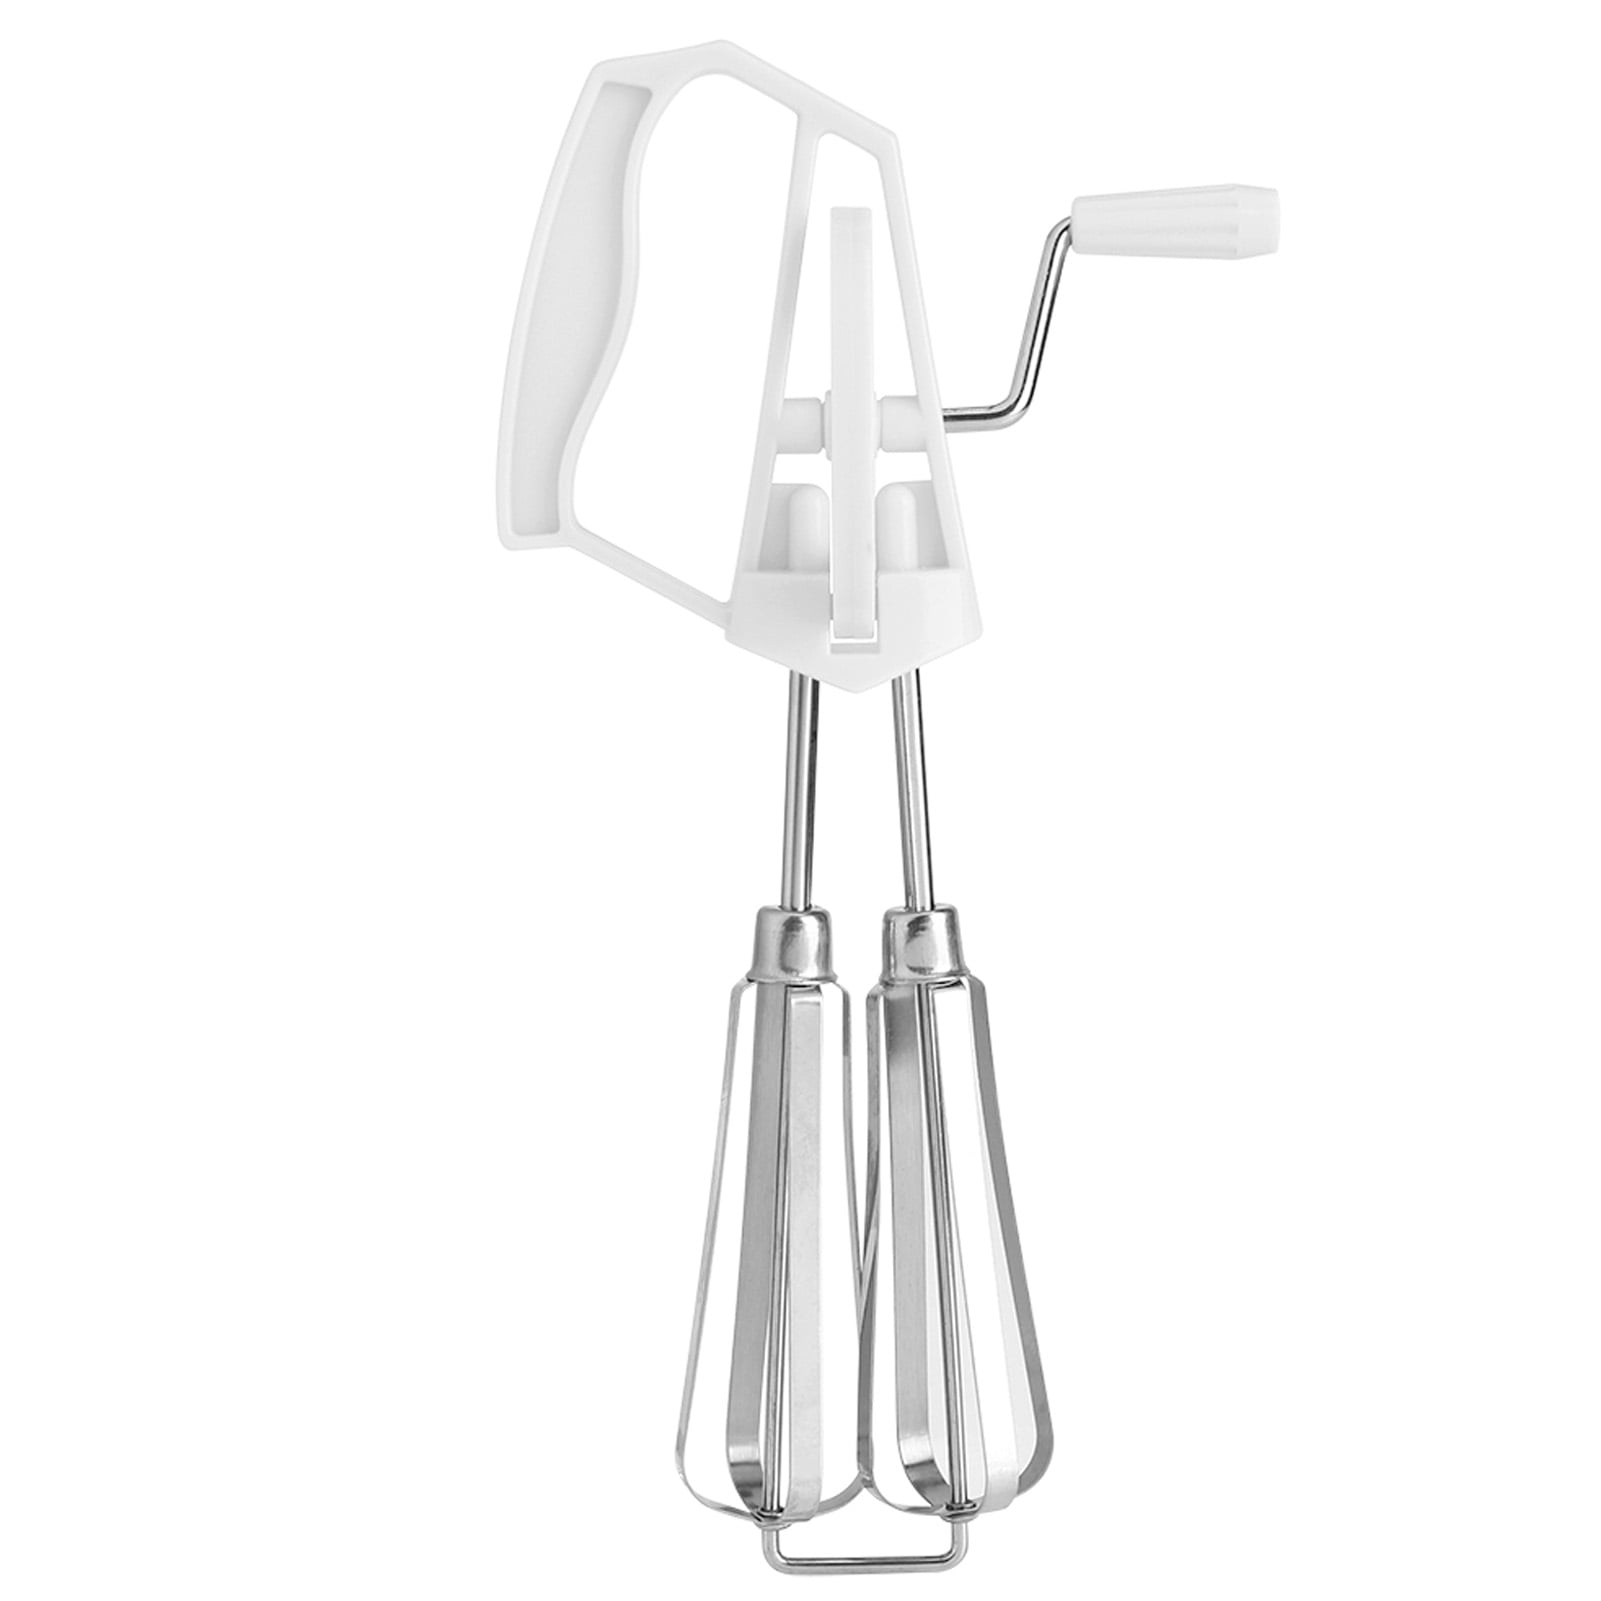  Stainless Steel Easy Operation High Efficiency Hand Crank Manual Hand  Mixer For Cooking White,Orange